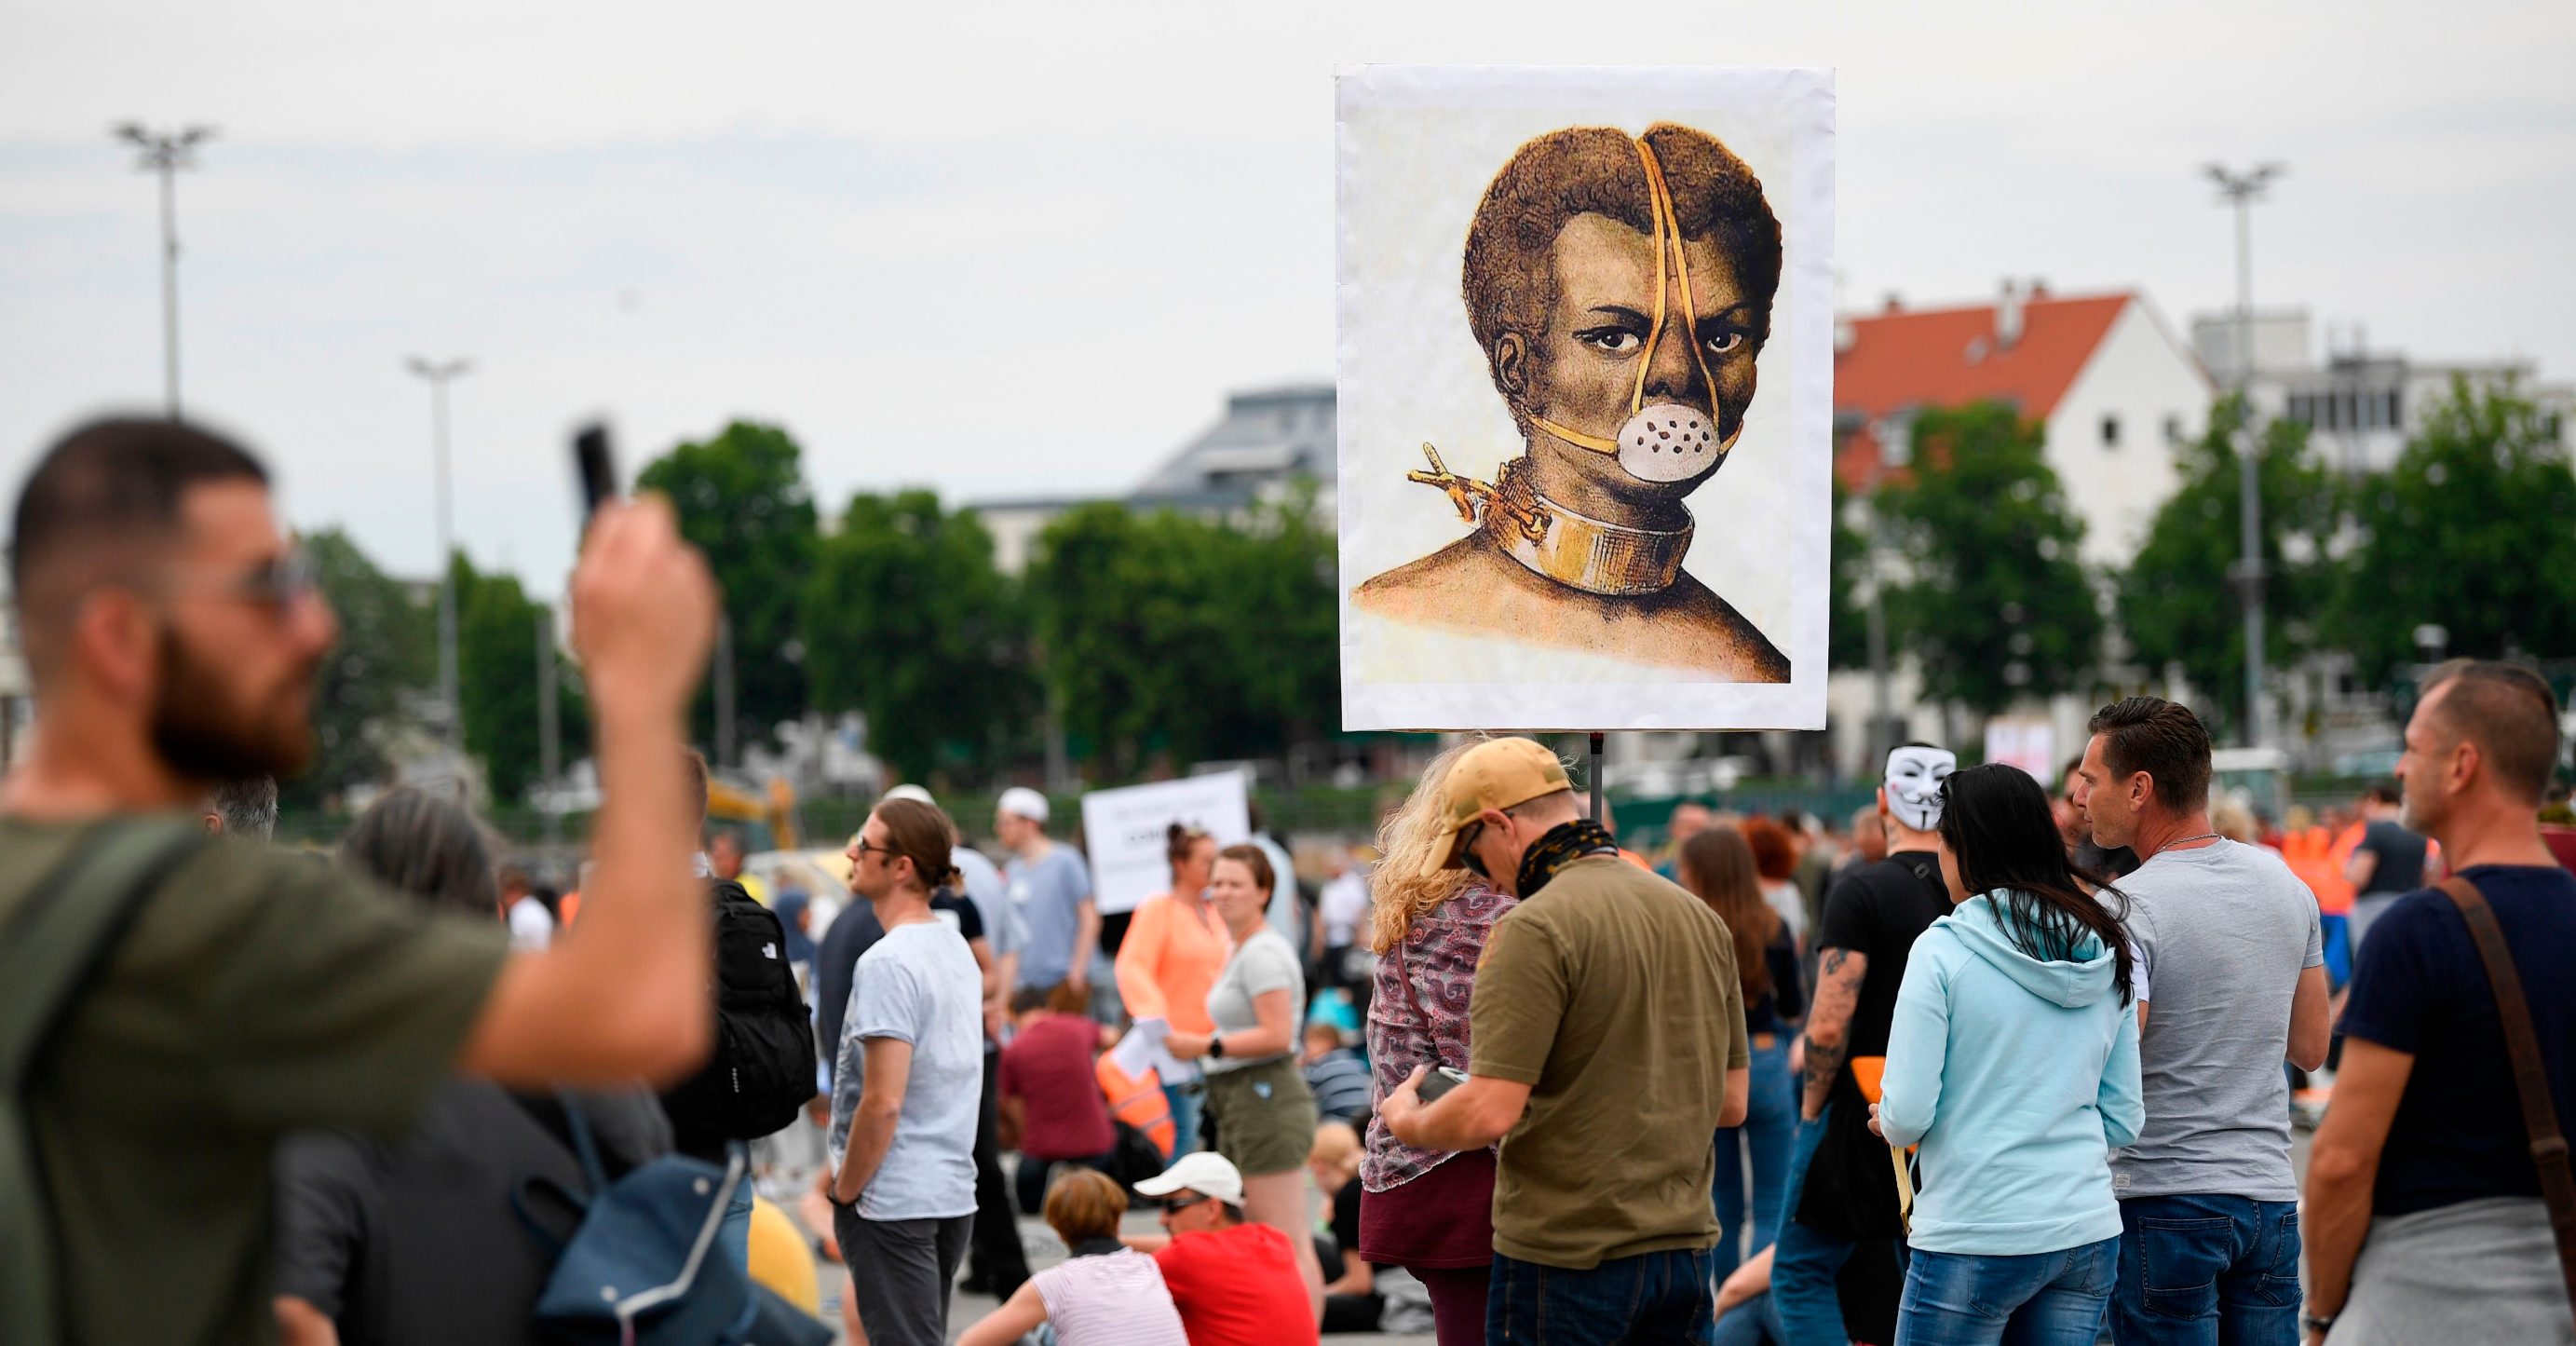 Demonstrators hold a placard showing a slave with a mask during a demonstration against the restrictions implemented to limit the spread of the novel coronavirus, at the grounds of the Cannstatter Wasen festival in Stuttgart, southern Germany, on May 9, 2020. - Several thousand people are expected to take part in the demonstration, attracting left and right-wing extremists, as well as conspiracy theorists and anti-vaxxers, who argue that the restrictions are an illegal attempt to curtail civil liberties by an authoritarian state. The event is organised by the 